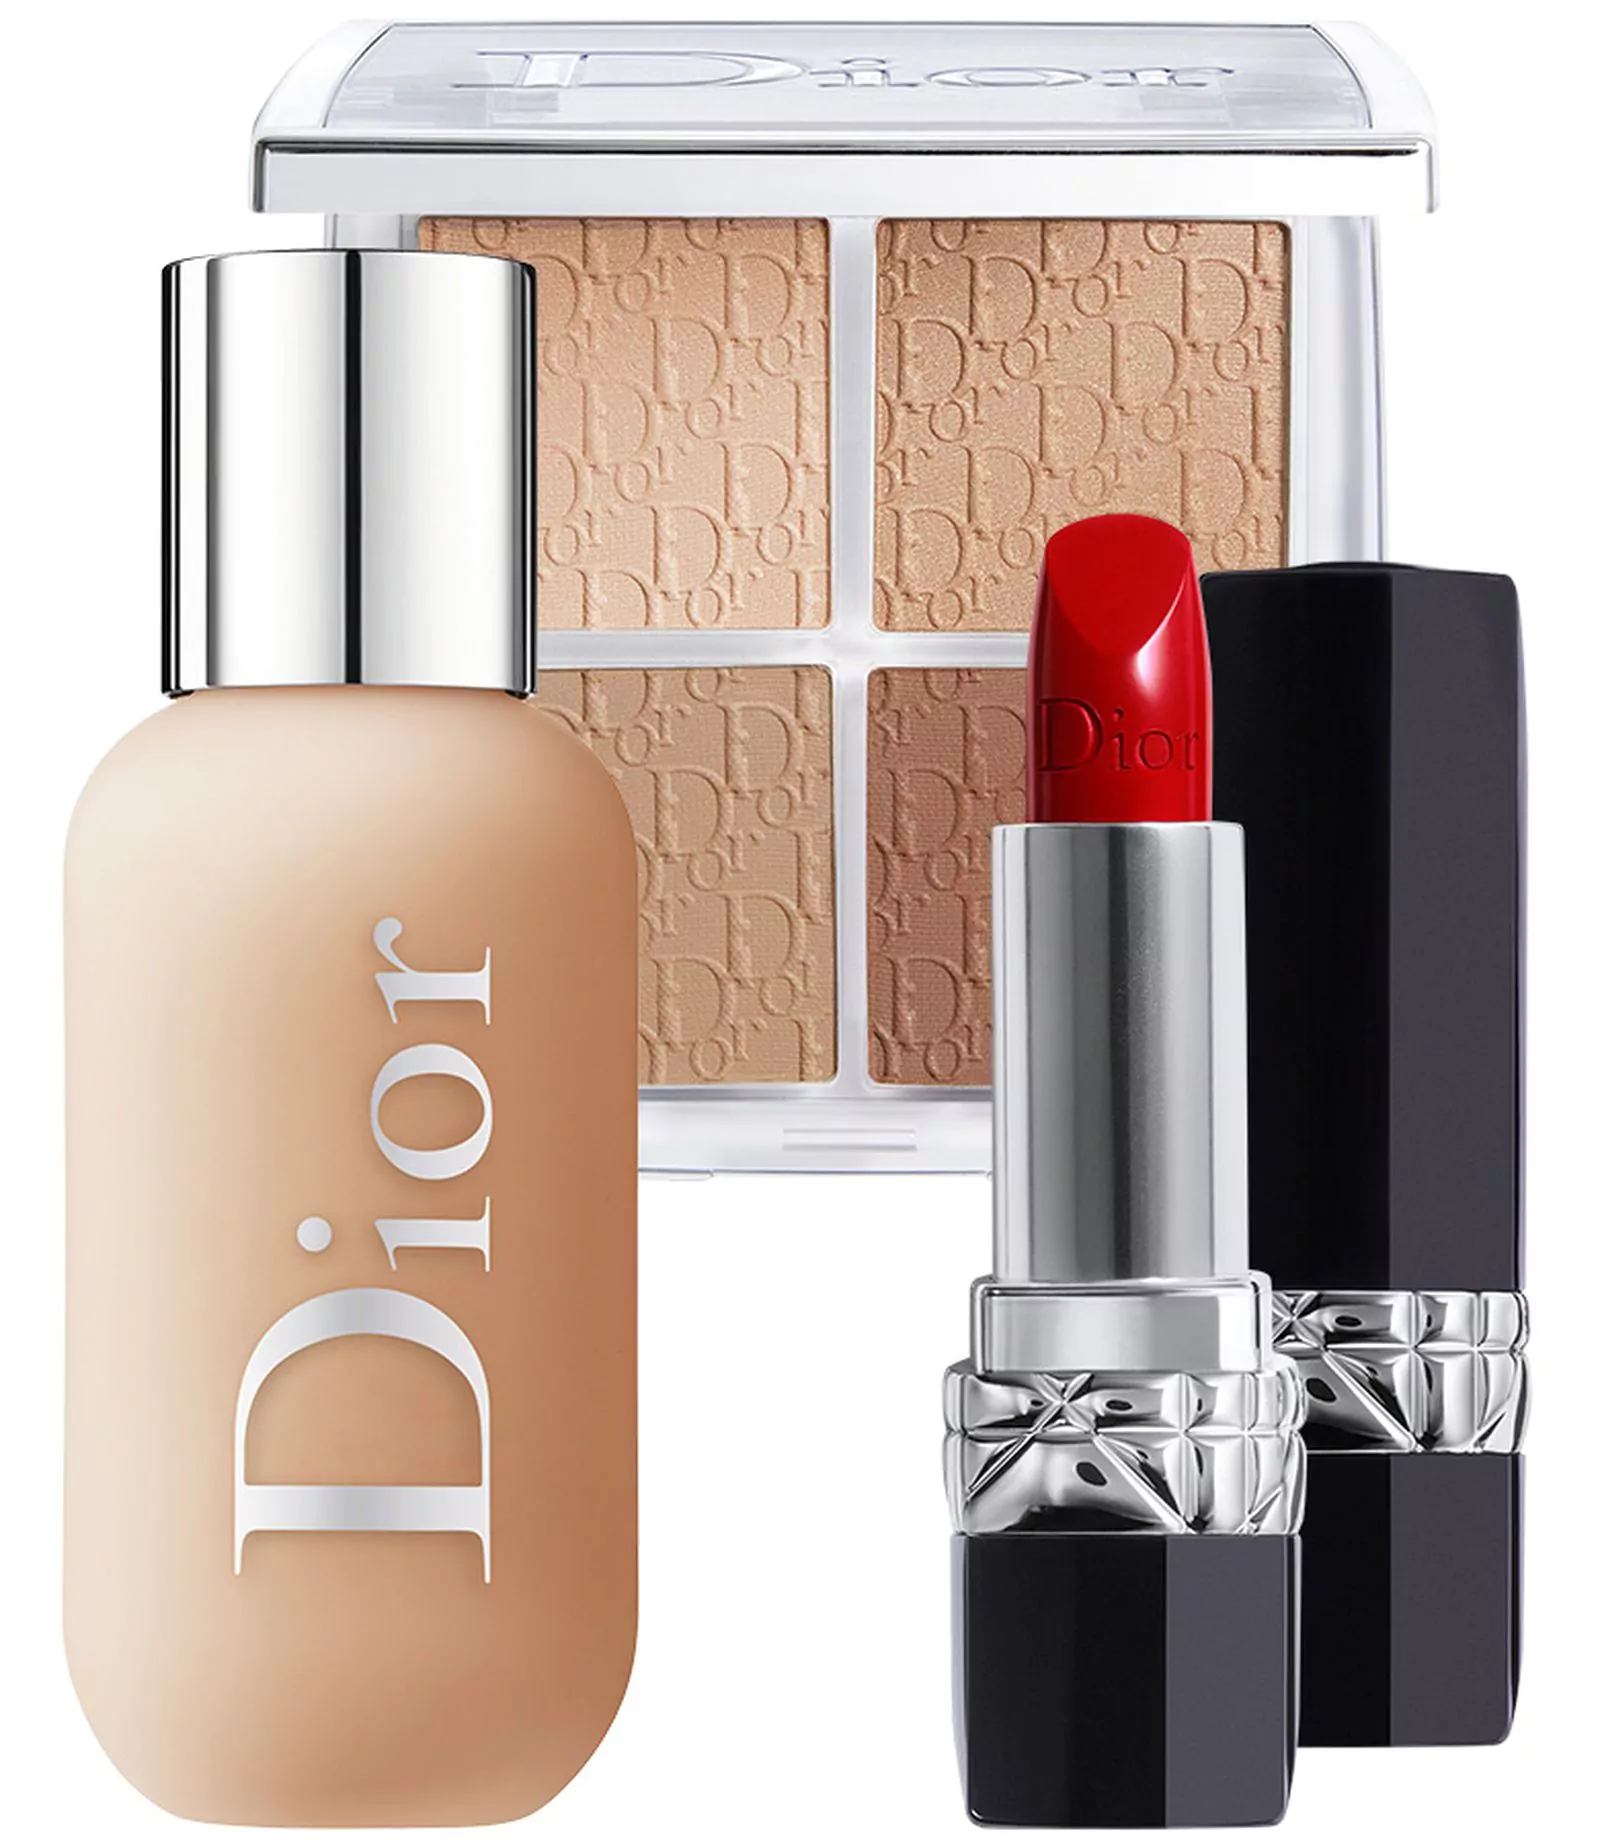 Dior Dior Backstage Contour, Dior Backstage Face and Body Foundation, помада Rouge Dior